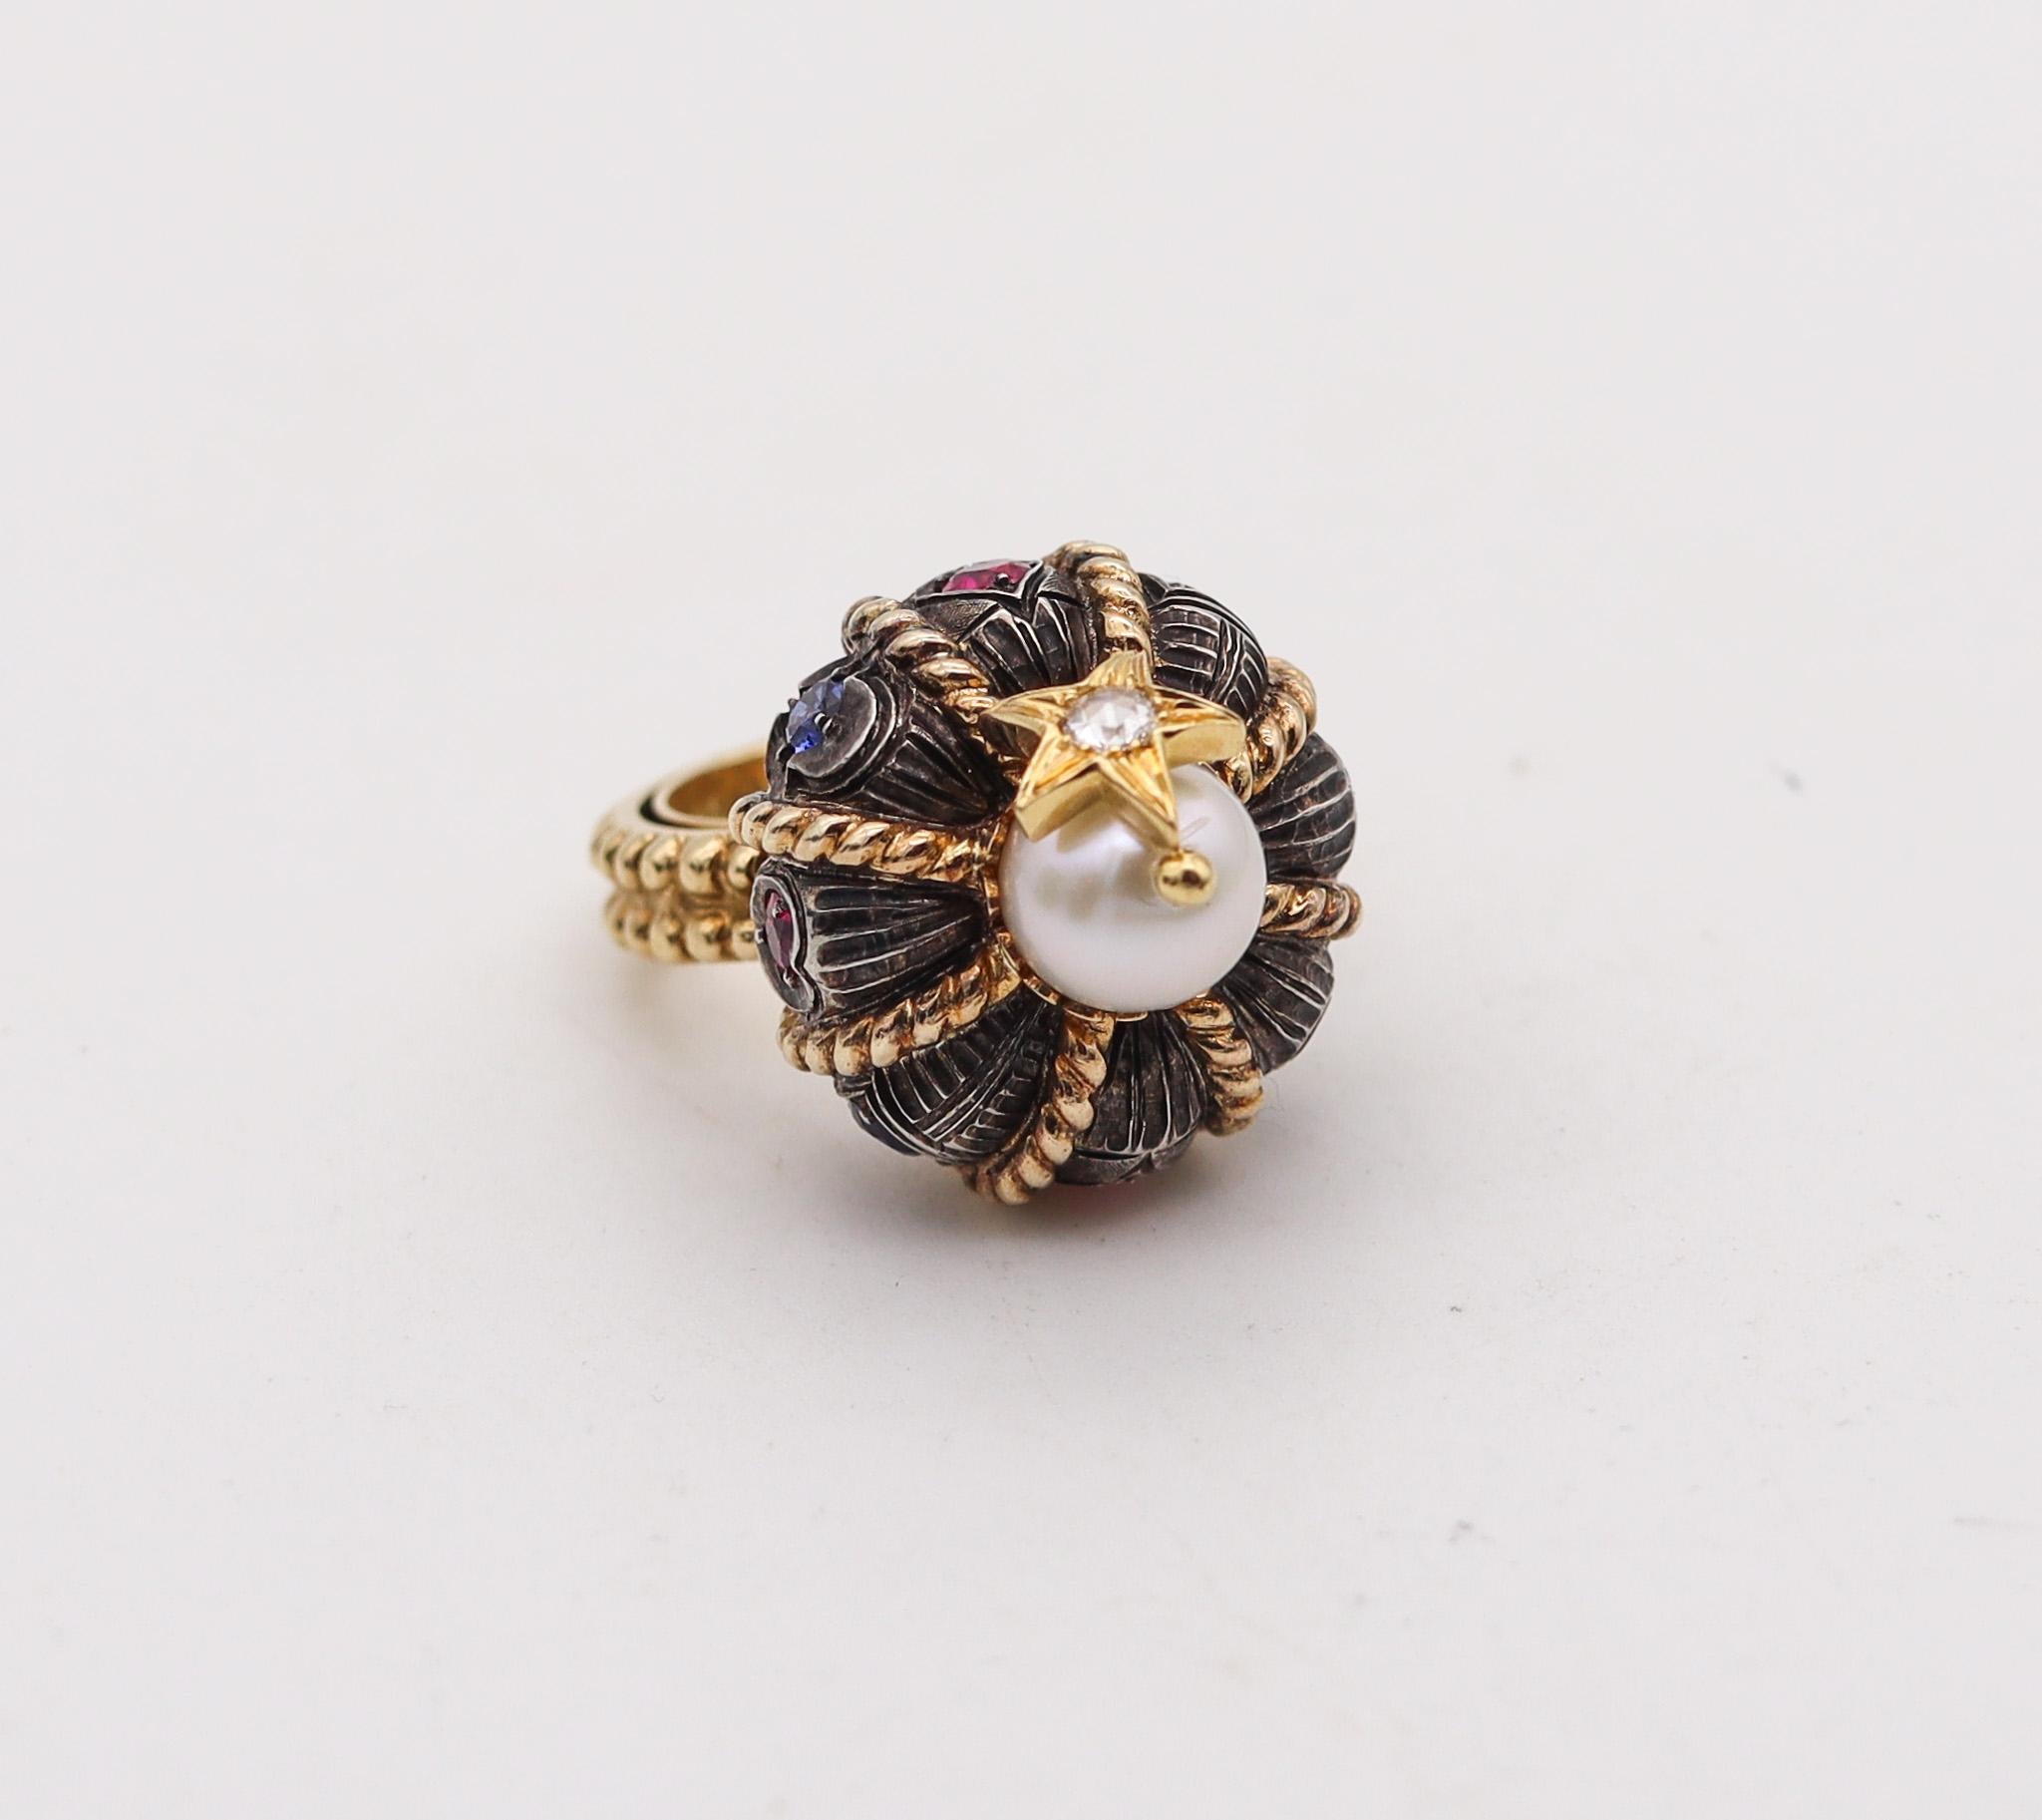 A cocktail ring designed by Nardi.

Very rare vintage ring, created in Venice Italy by the iconic and exclusive Venetian jewelry house of Nardi. This unique and one-of-a-kind cocktail ring has been carefully crafted in the shape pf a Moorish turban